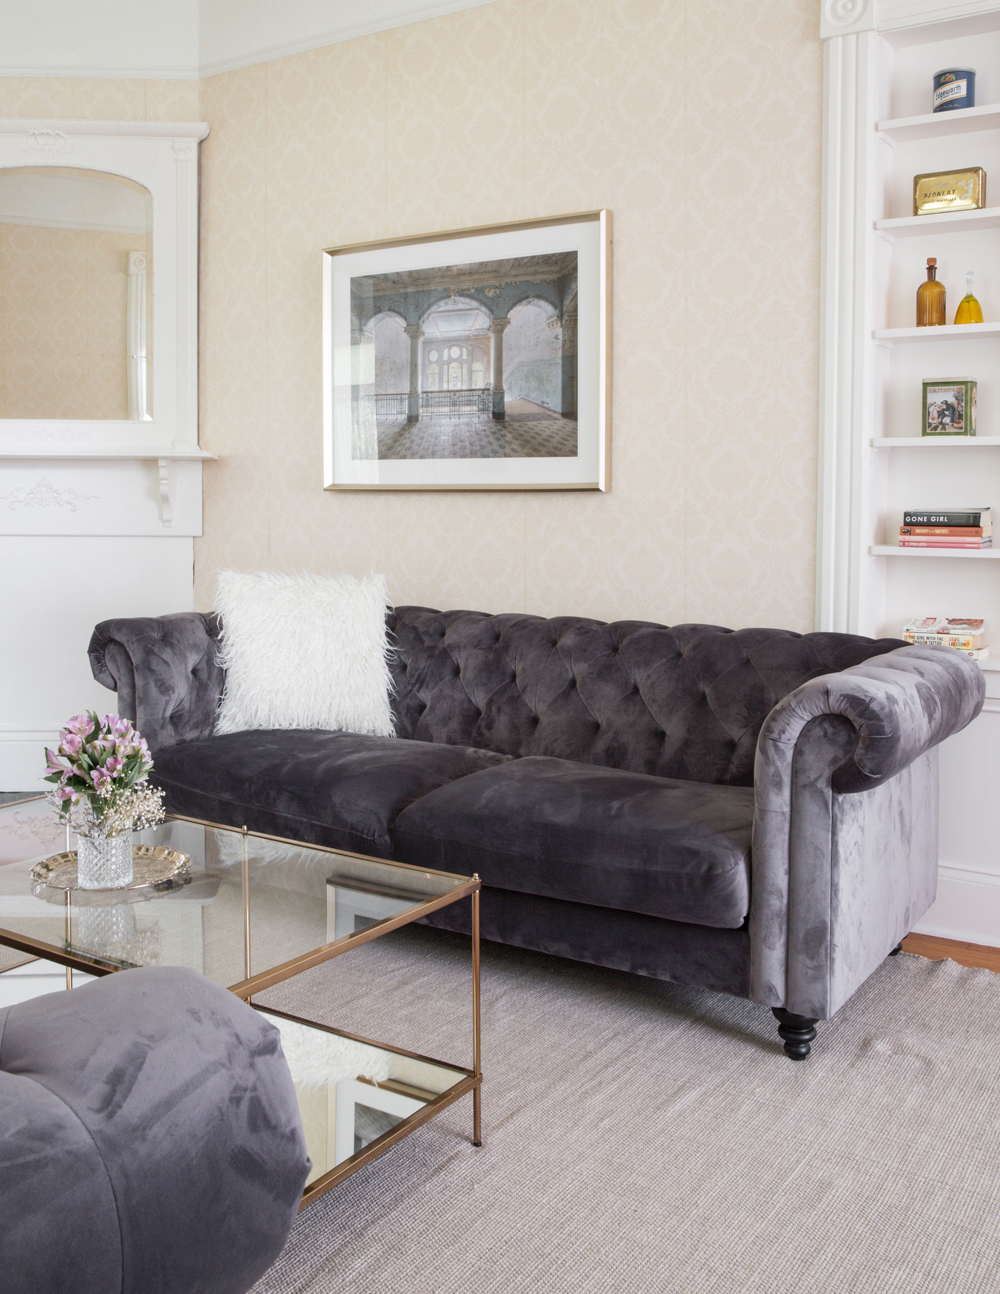 Grey tufted sofas add a modern-vintage flourish to the living room